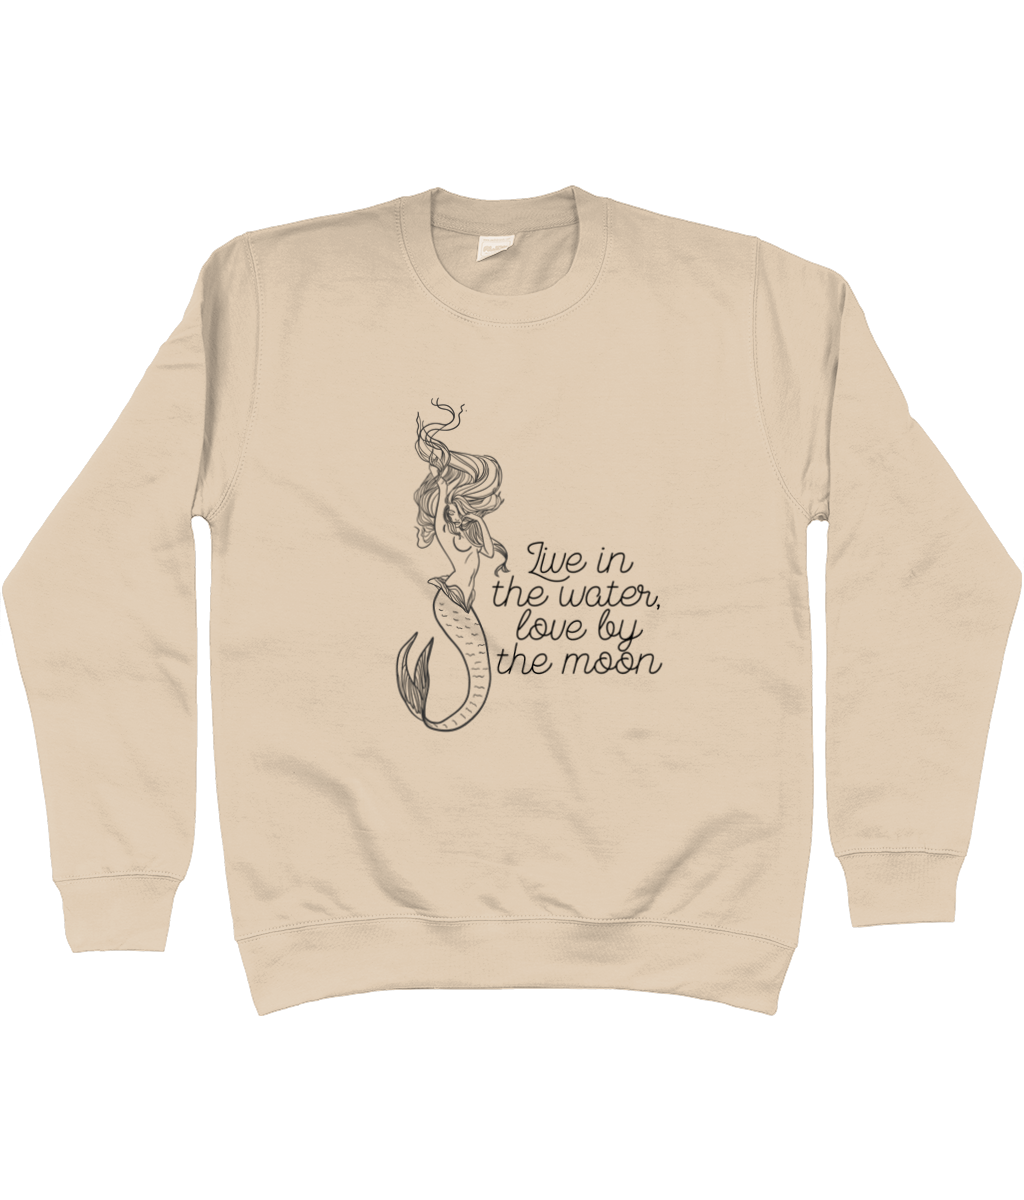 Unisex Sweatshirt Live in the water, love by the moon